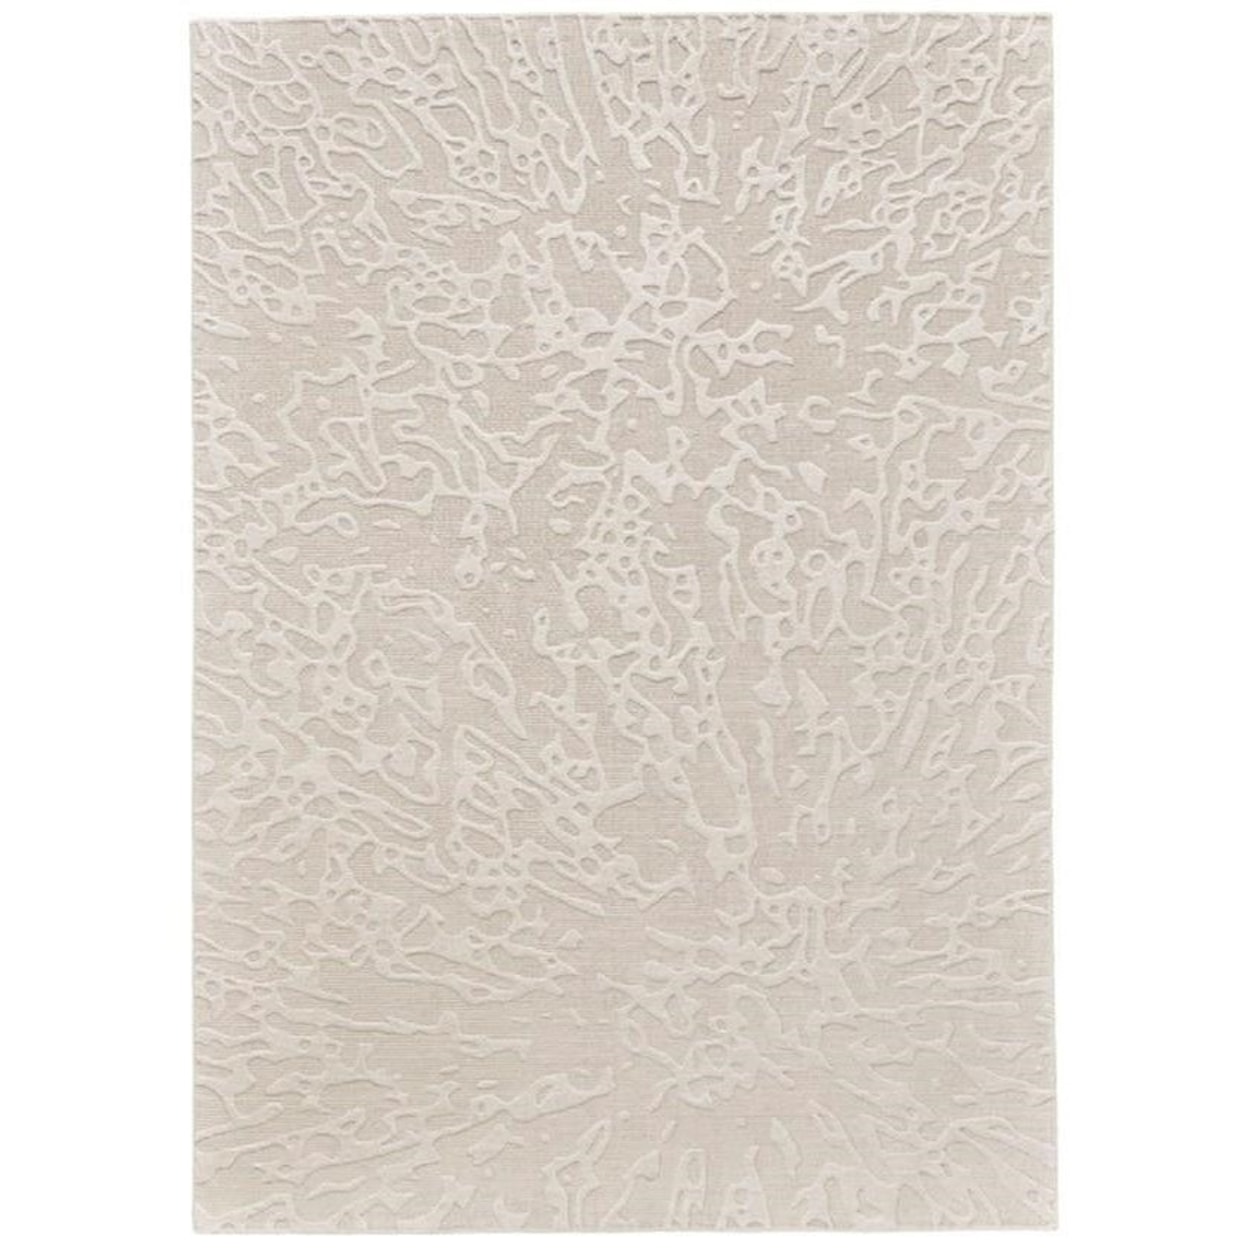 Feizy Rugs Leilani Cashmere 8'-6" x 11'-6" Area Rug